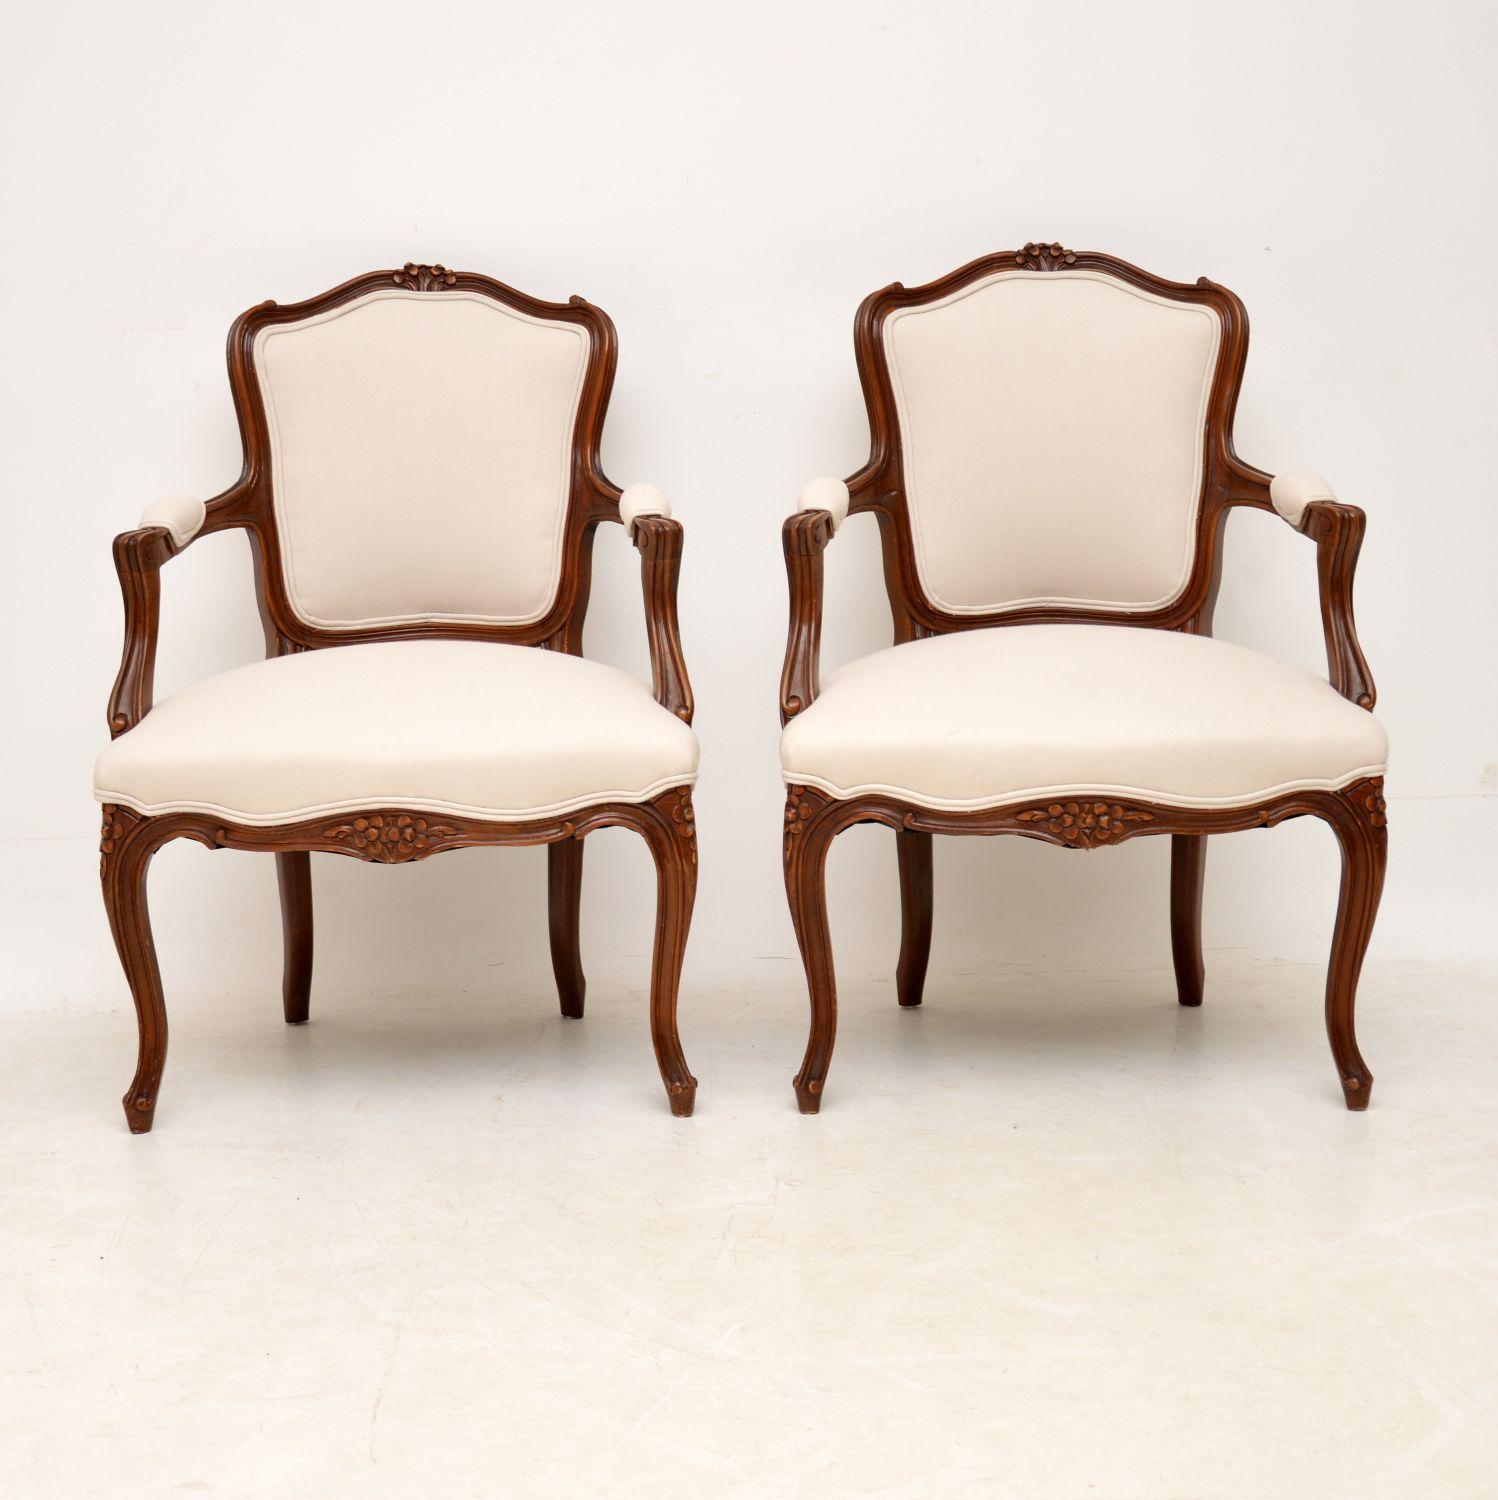 Pair of antique French open arm walnut salon armchairs with well carved frames and in very good condition, dating to circa 1920s period. They are strong, sturdy and comfortable, having just been professionally re-upholstered in our very popular